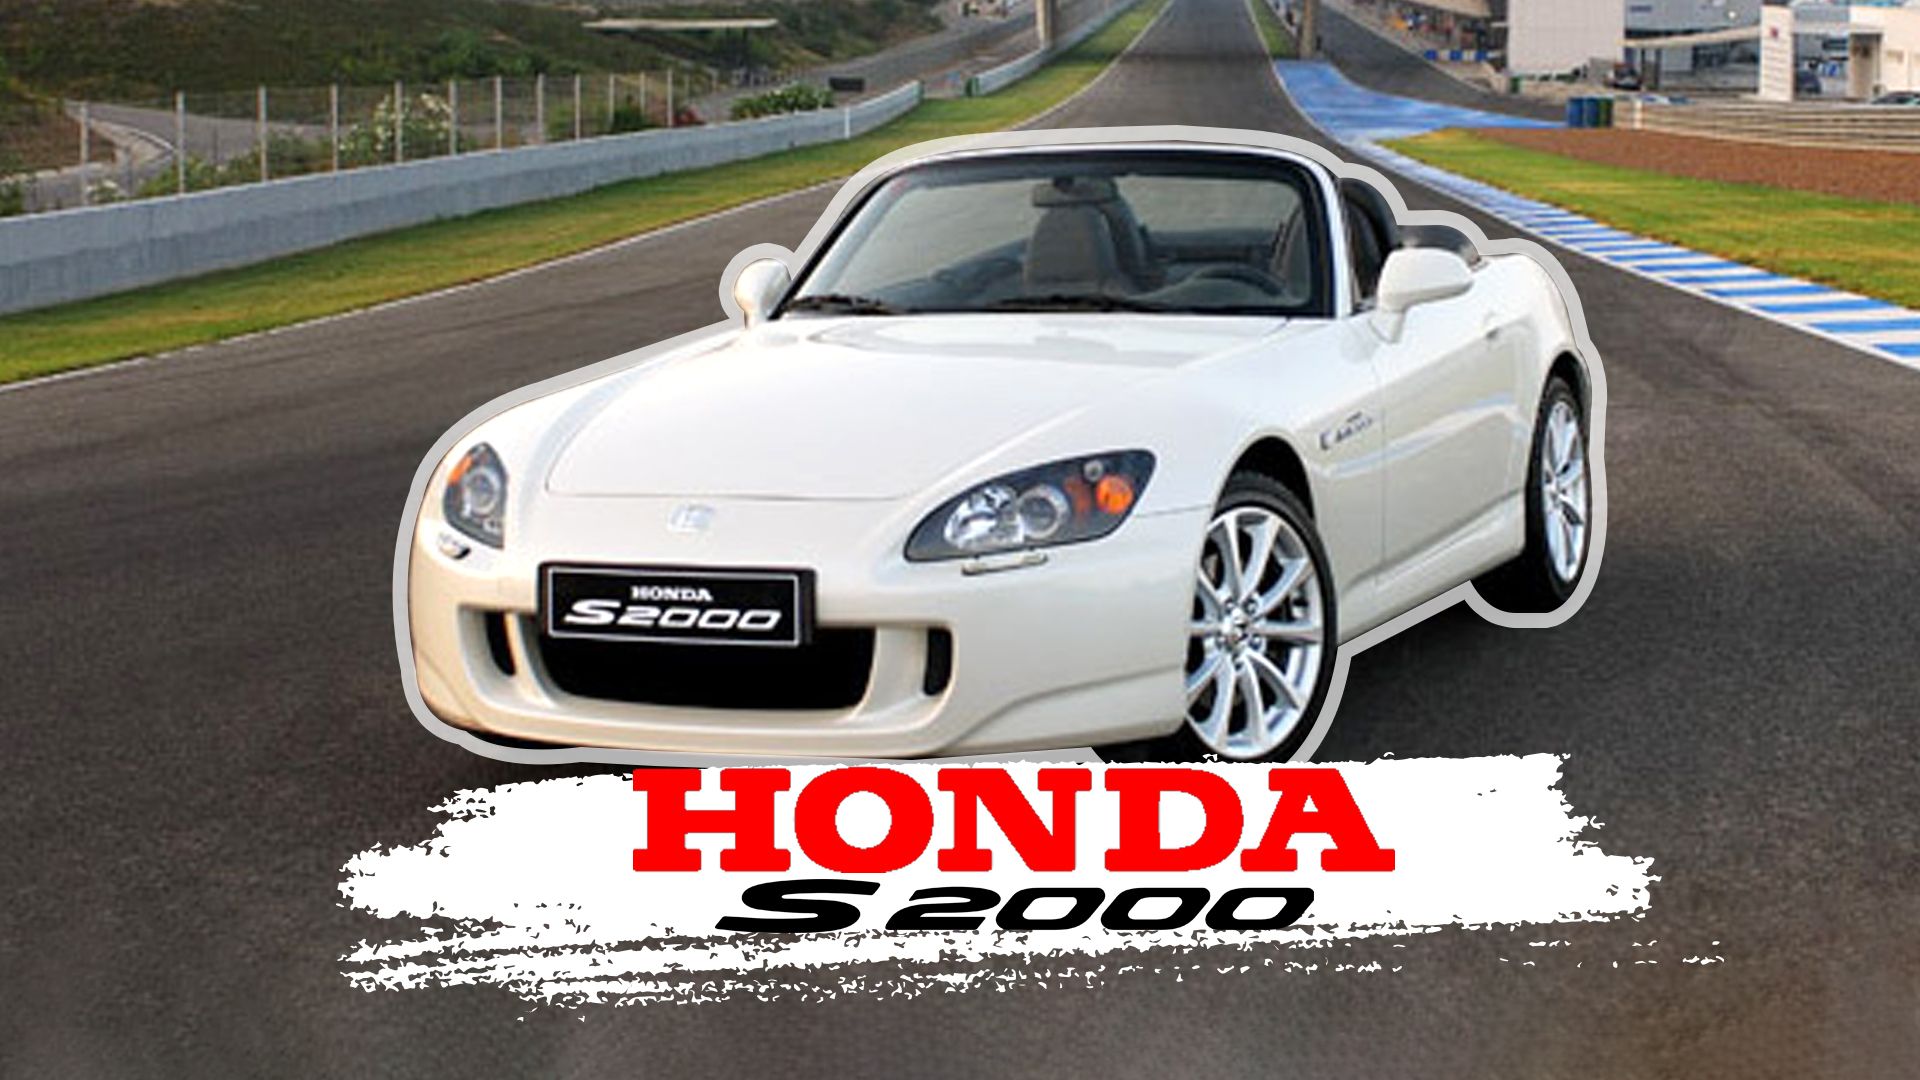 Hardtop Honda S2000 Is A Reliable Daily Driver That Can Still